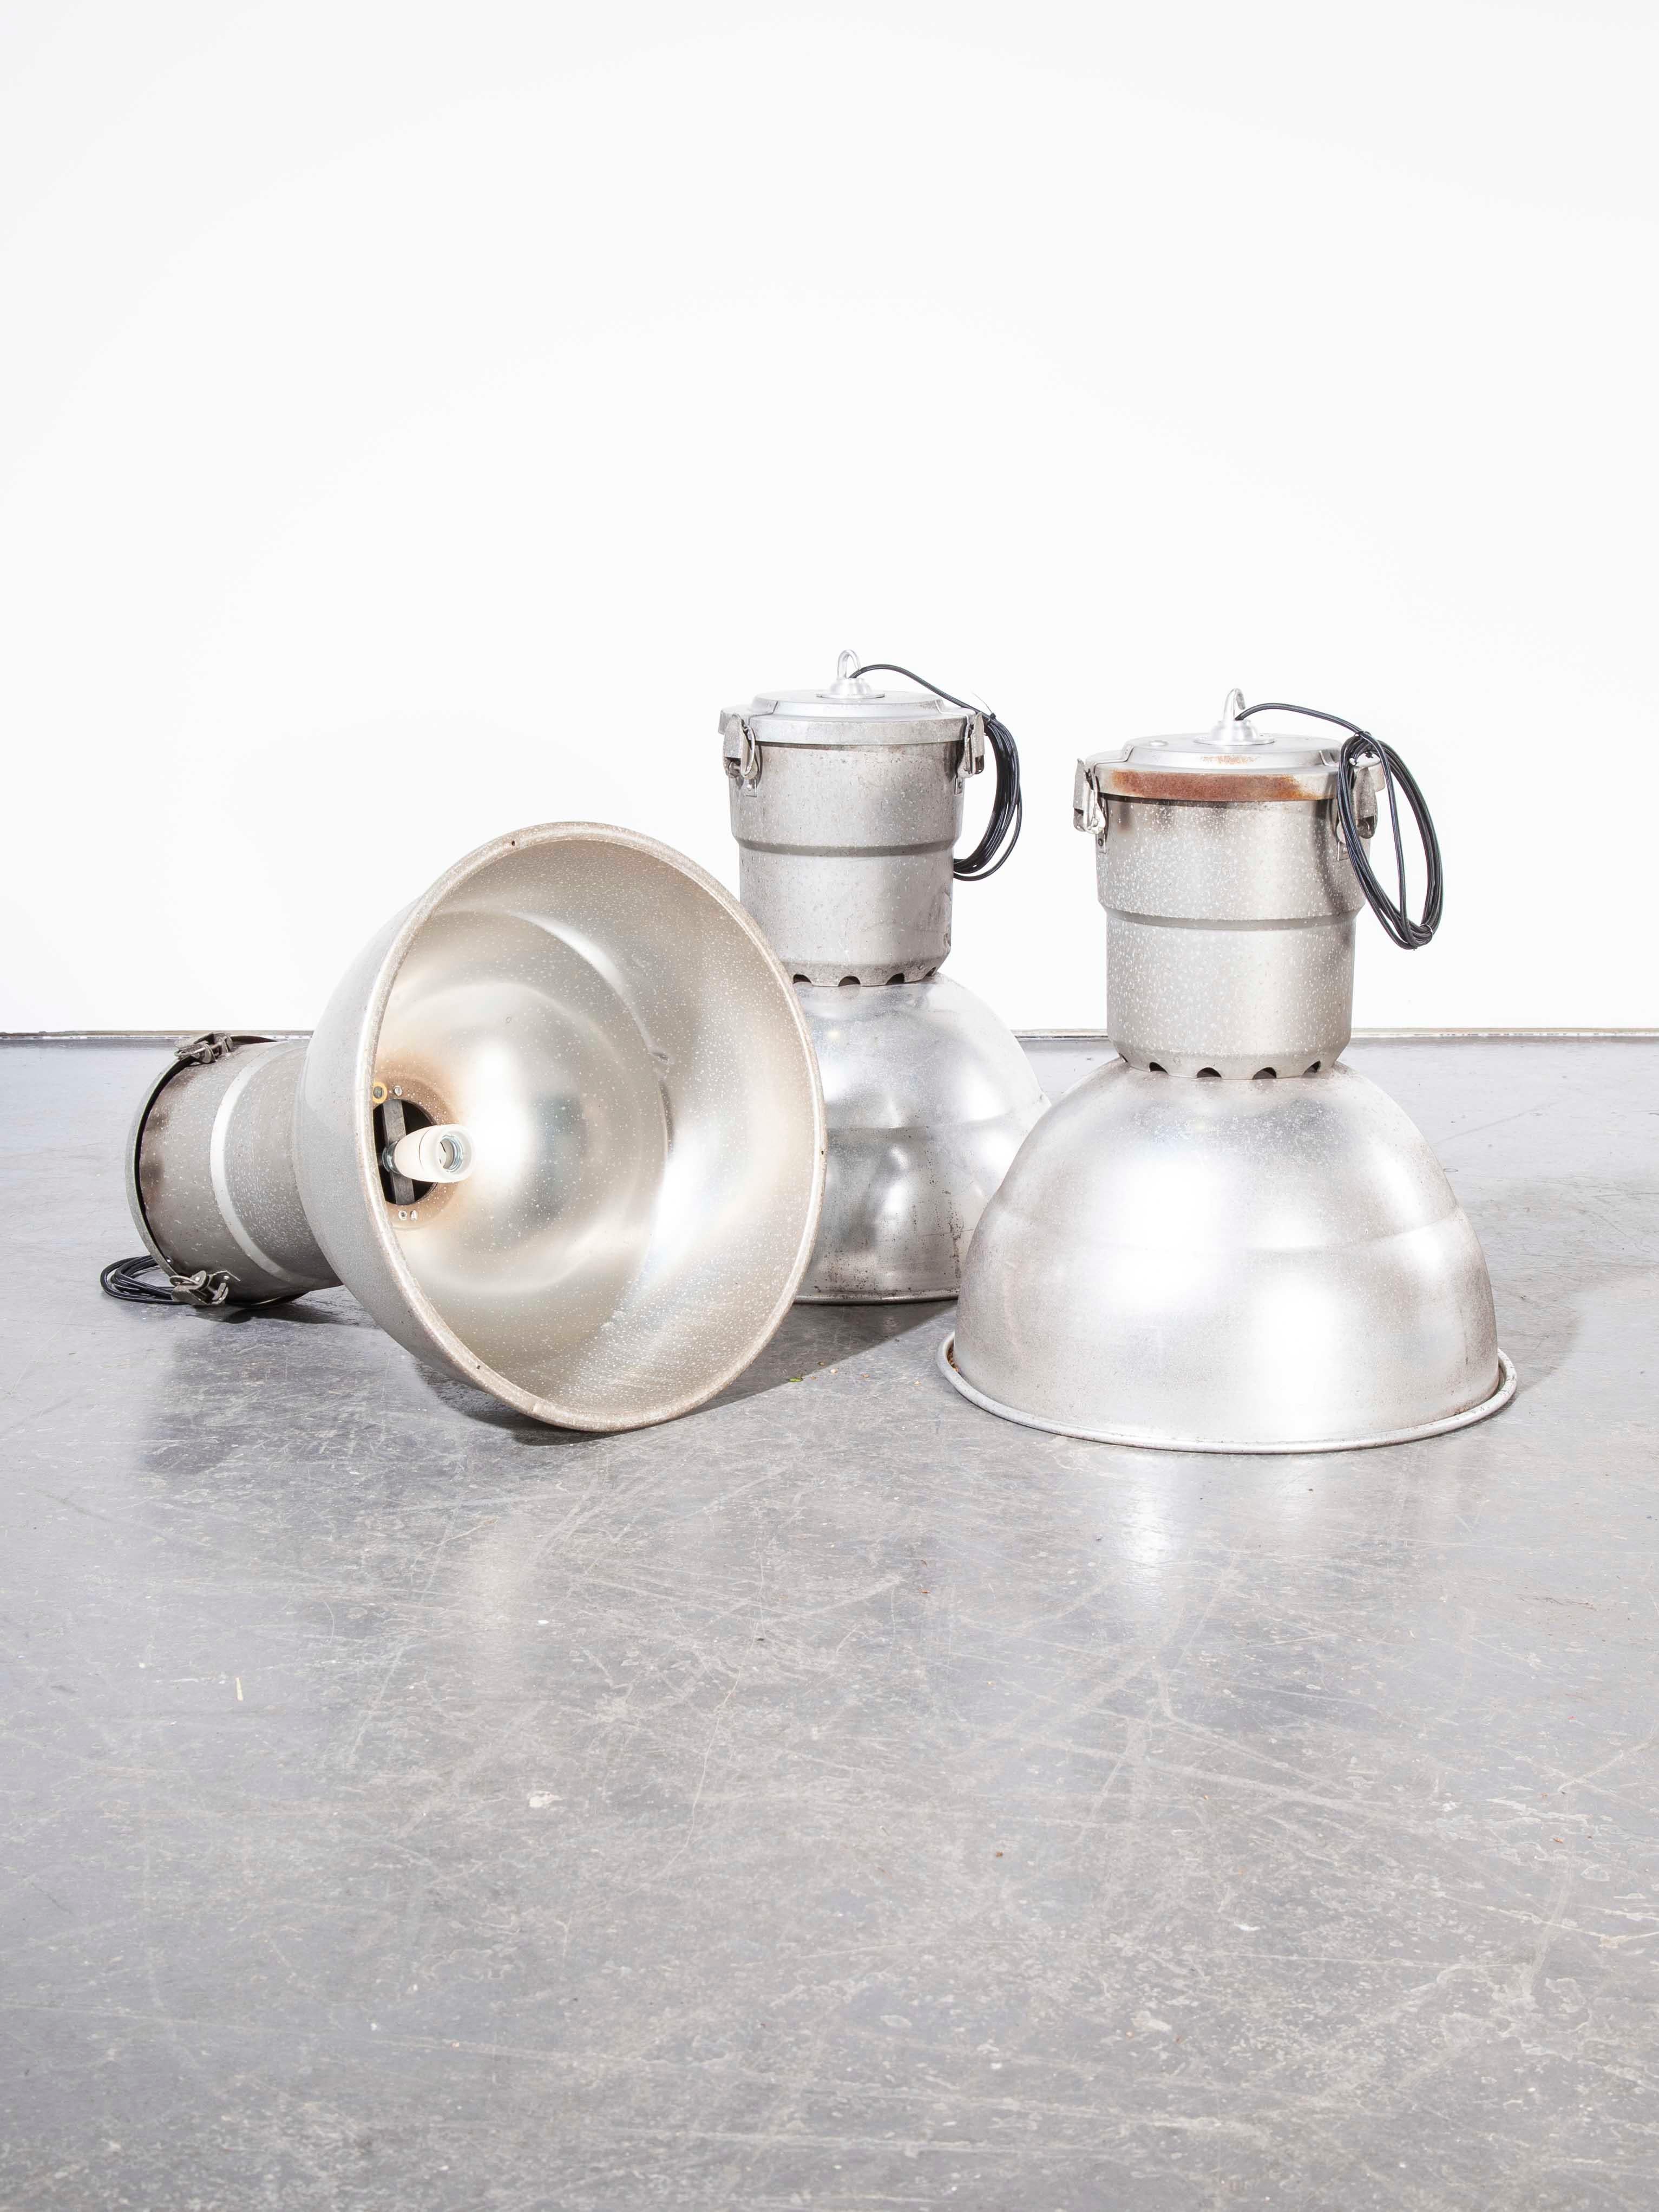 1960s large industrial spun aluminium French ceiling pendant lamps/light shades. Featuring large spun aluminium shades and aluminium galleries tops. The key feature of these lamps is their aluminium construction and original condition and size, we